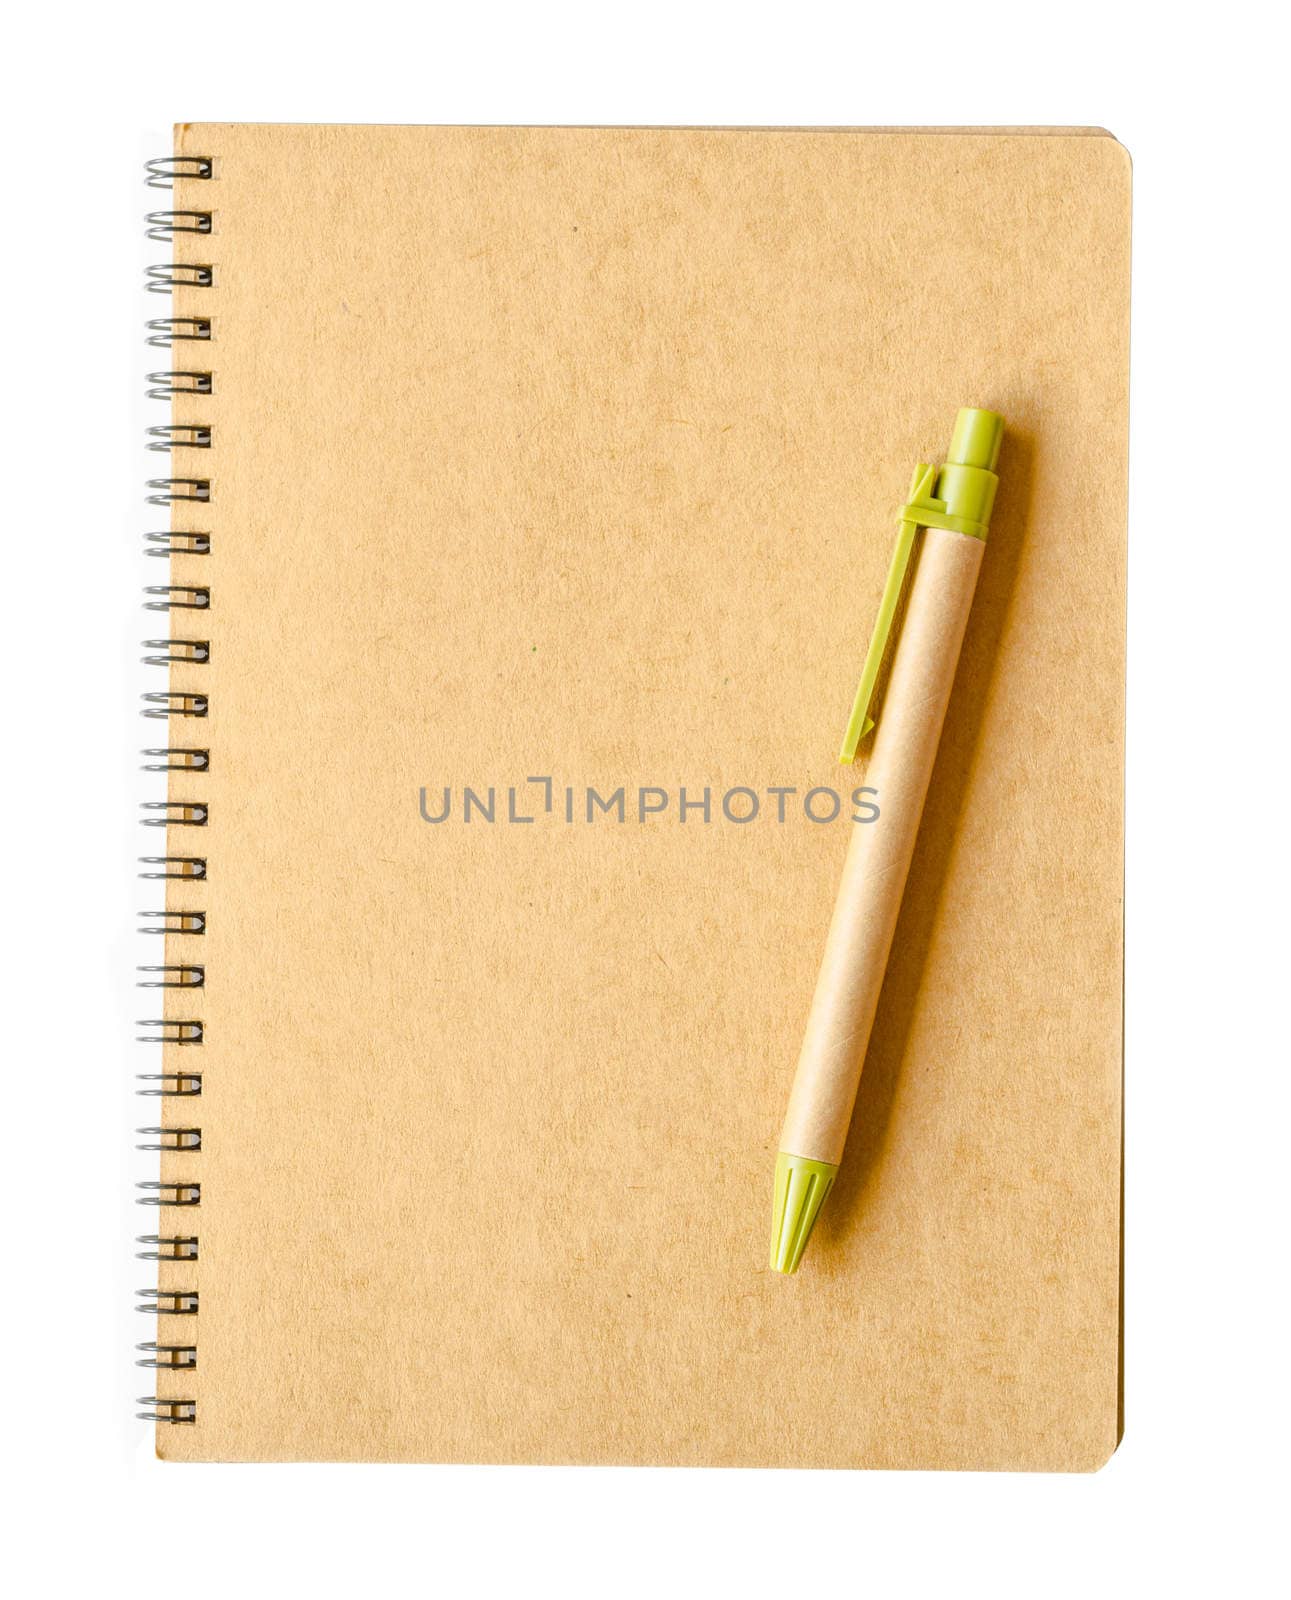 Recycle brown paper notebook and pen by Gamjai